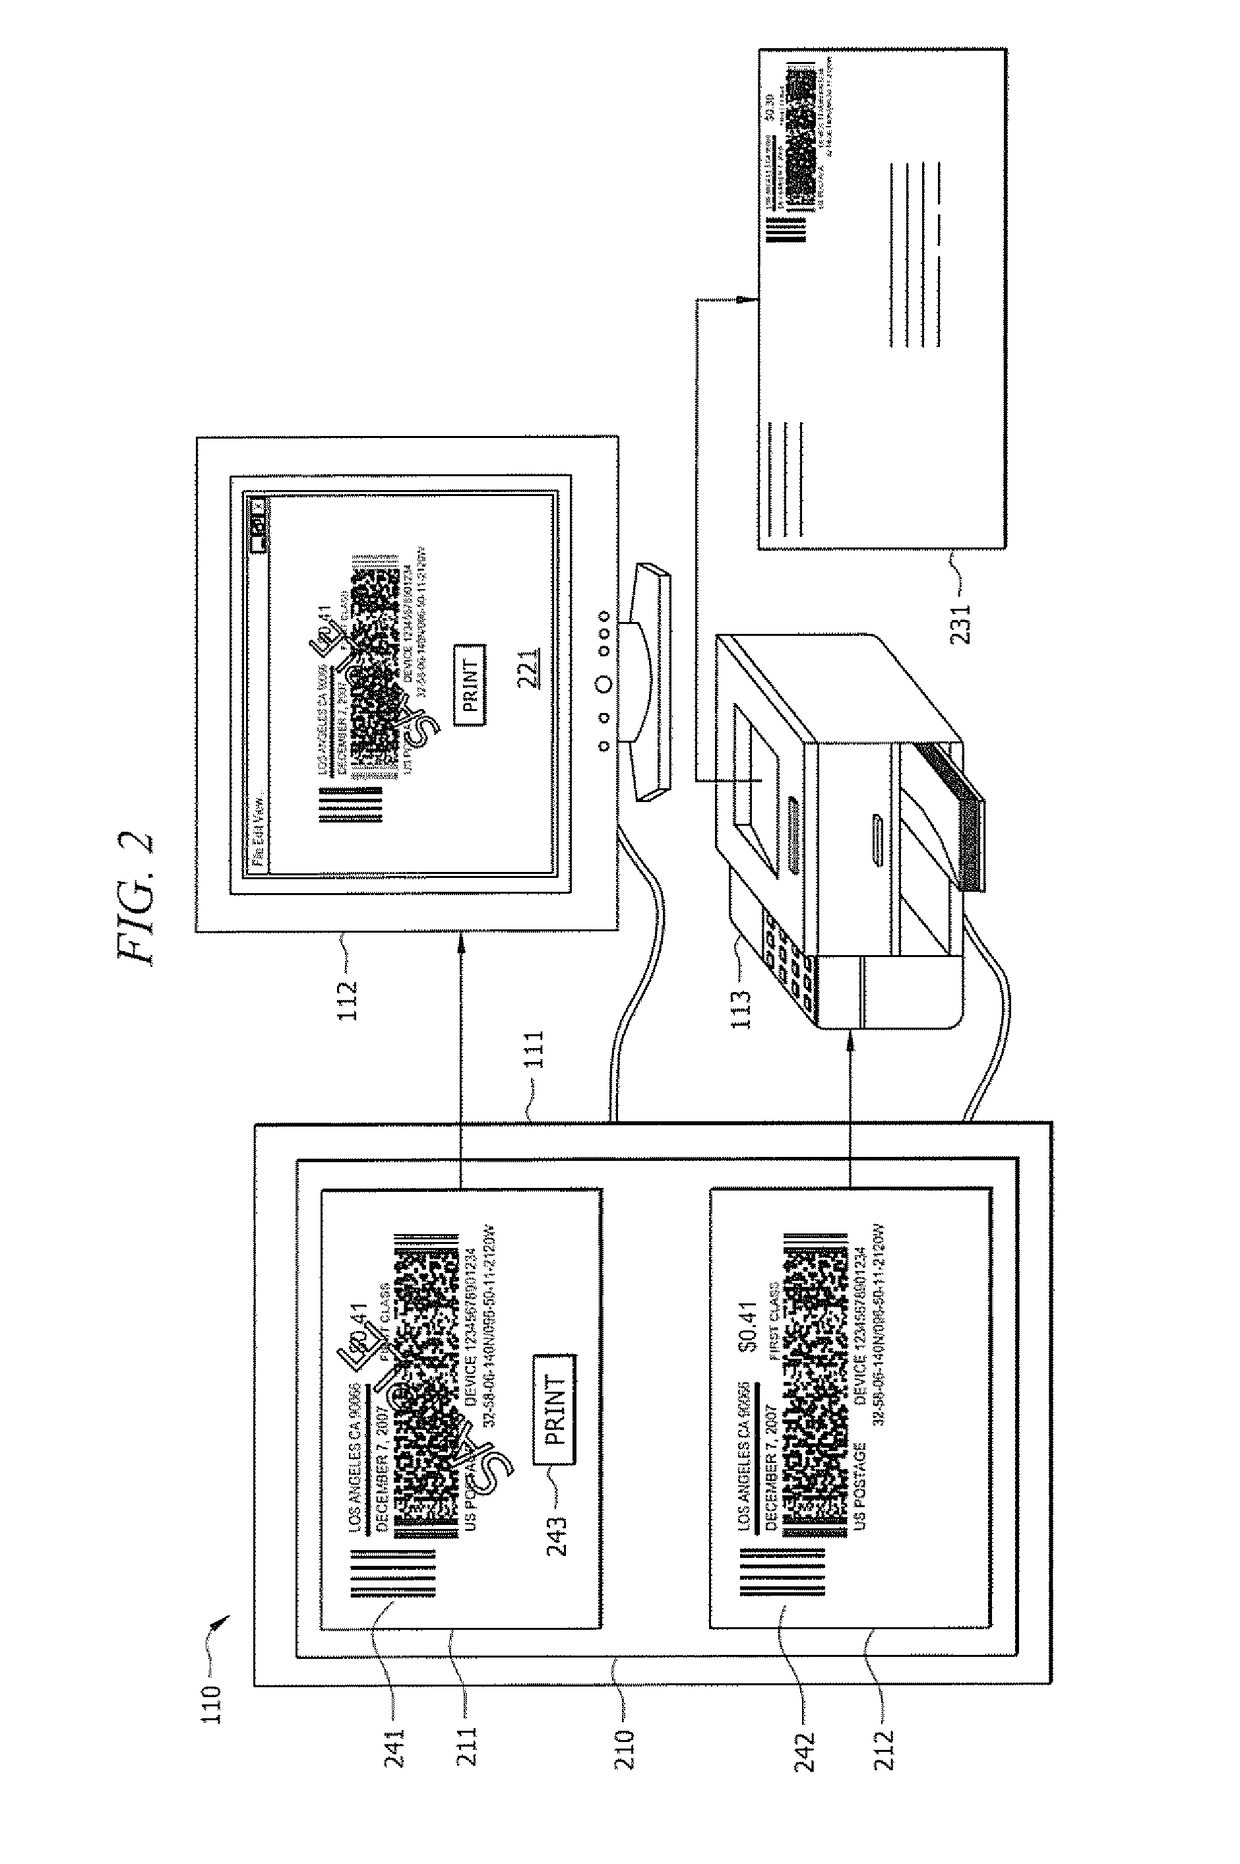 Systems and methods for protecting content when using a general purpose user interface application